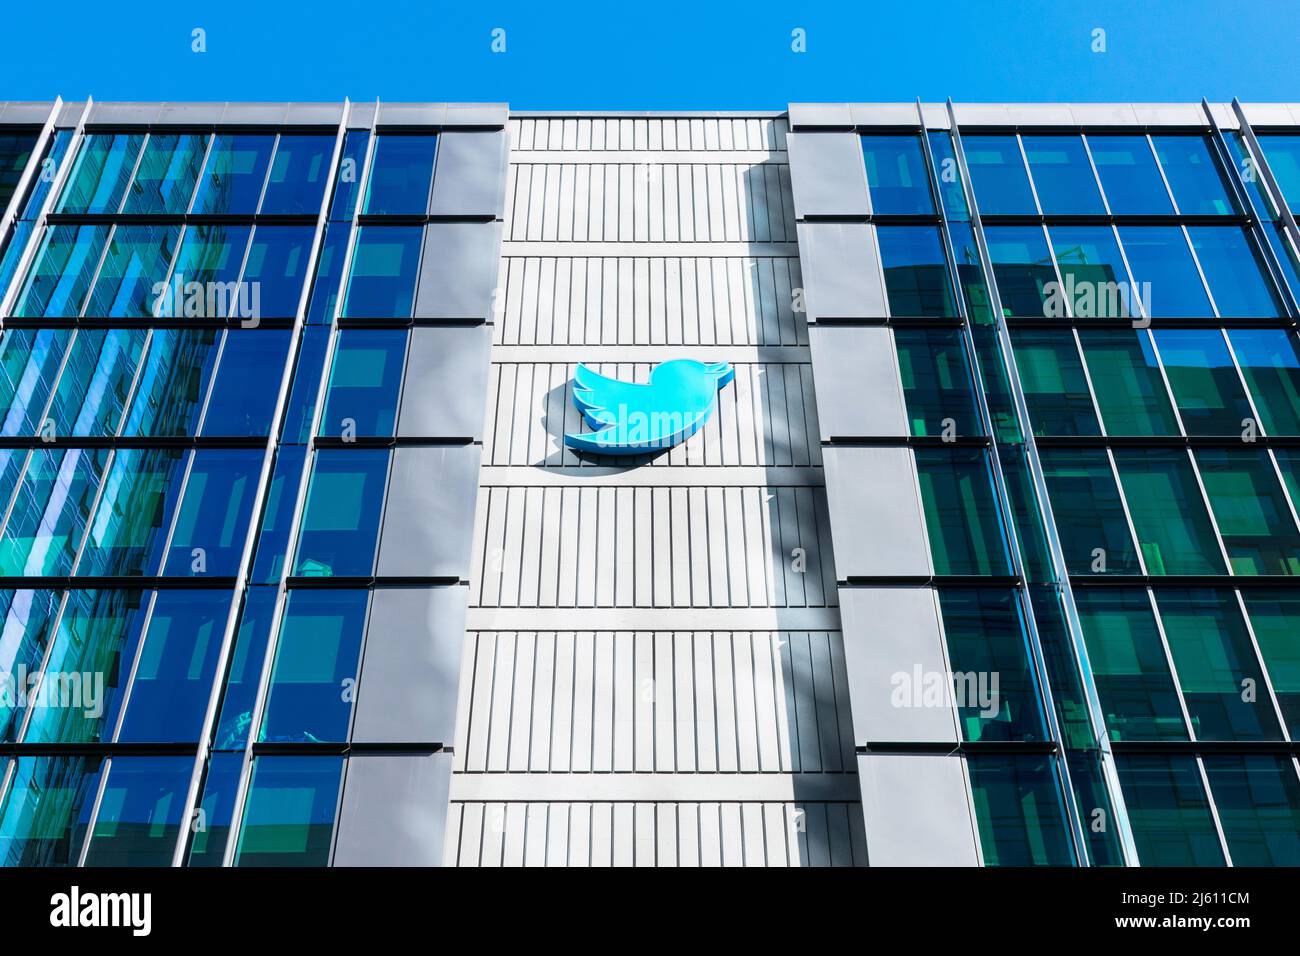 Twitter sign, logo on headquarters campus building. Twitter is American microblogging and social networking service - San Francisco, California, USA Stock Photo